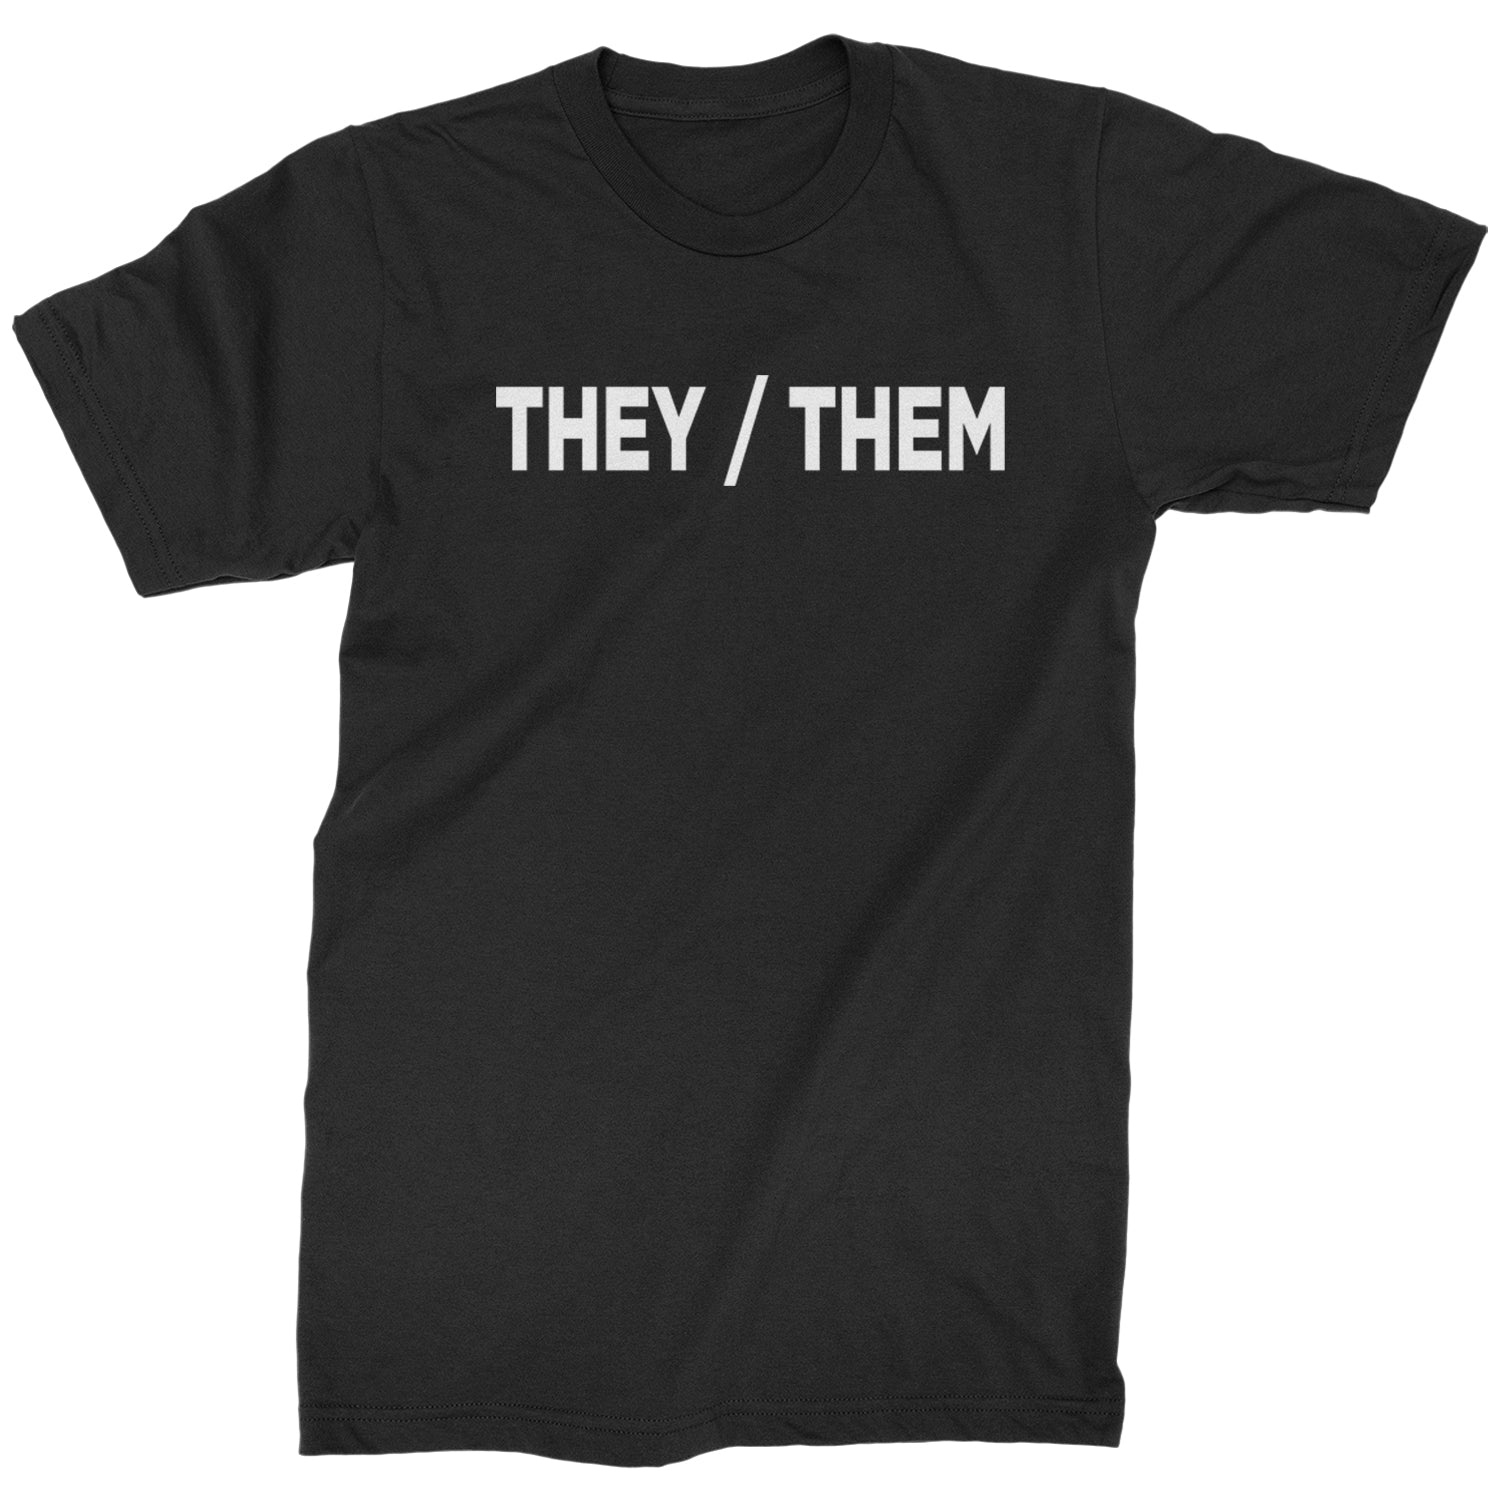 They Them Gender Pronouns Diversity and Inclusion Mens T-shirt binary, civil, gay, he, her, him, nonbinary, pride, rights, she, them, they by Expression Tees